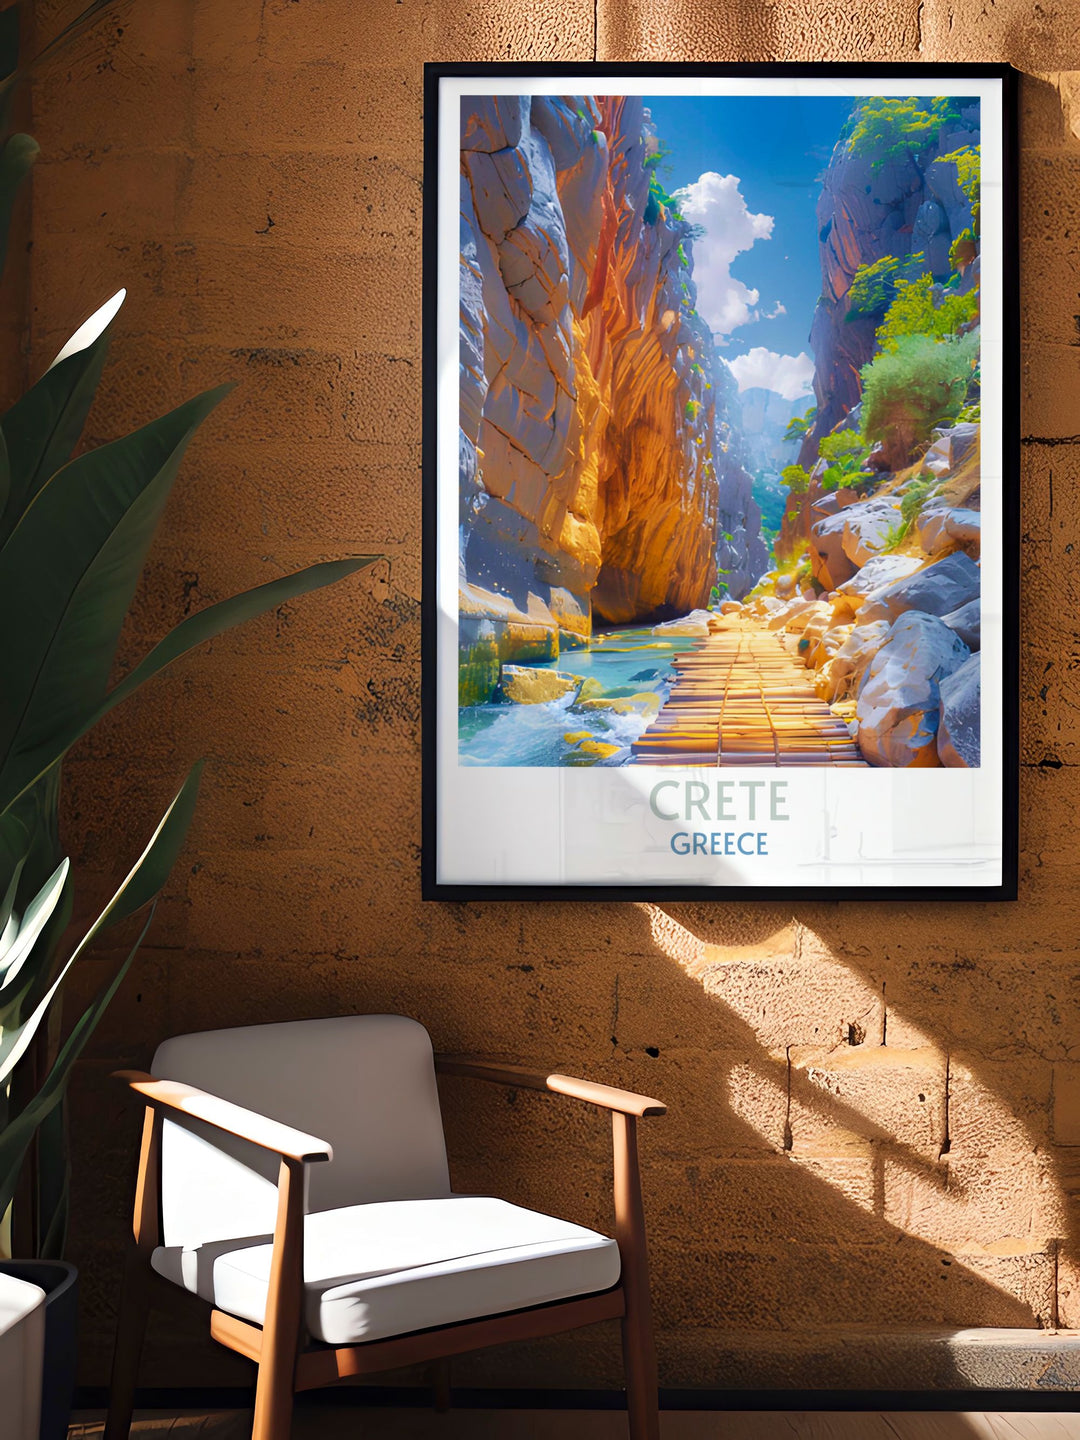 Samaria Gorge travel poster illustrating the captivating and wild natural environment ideal for hikers and nature lovers visiting Crete.